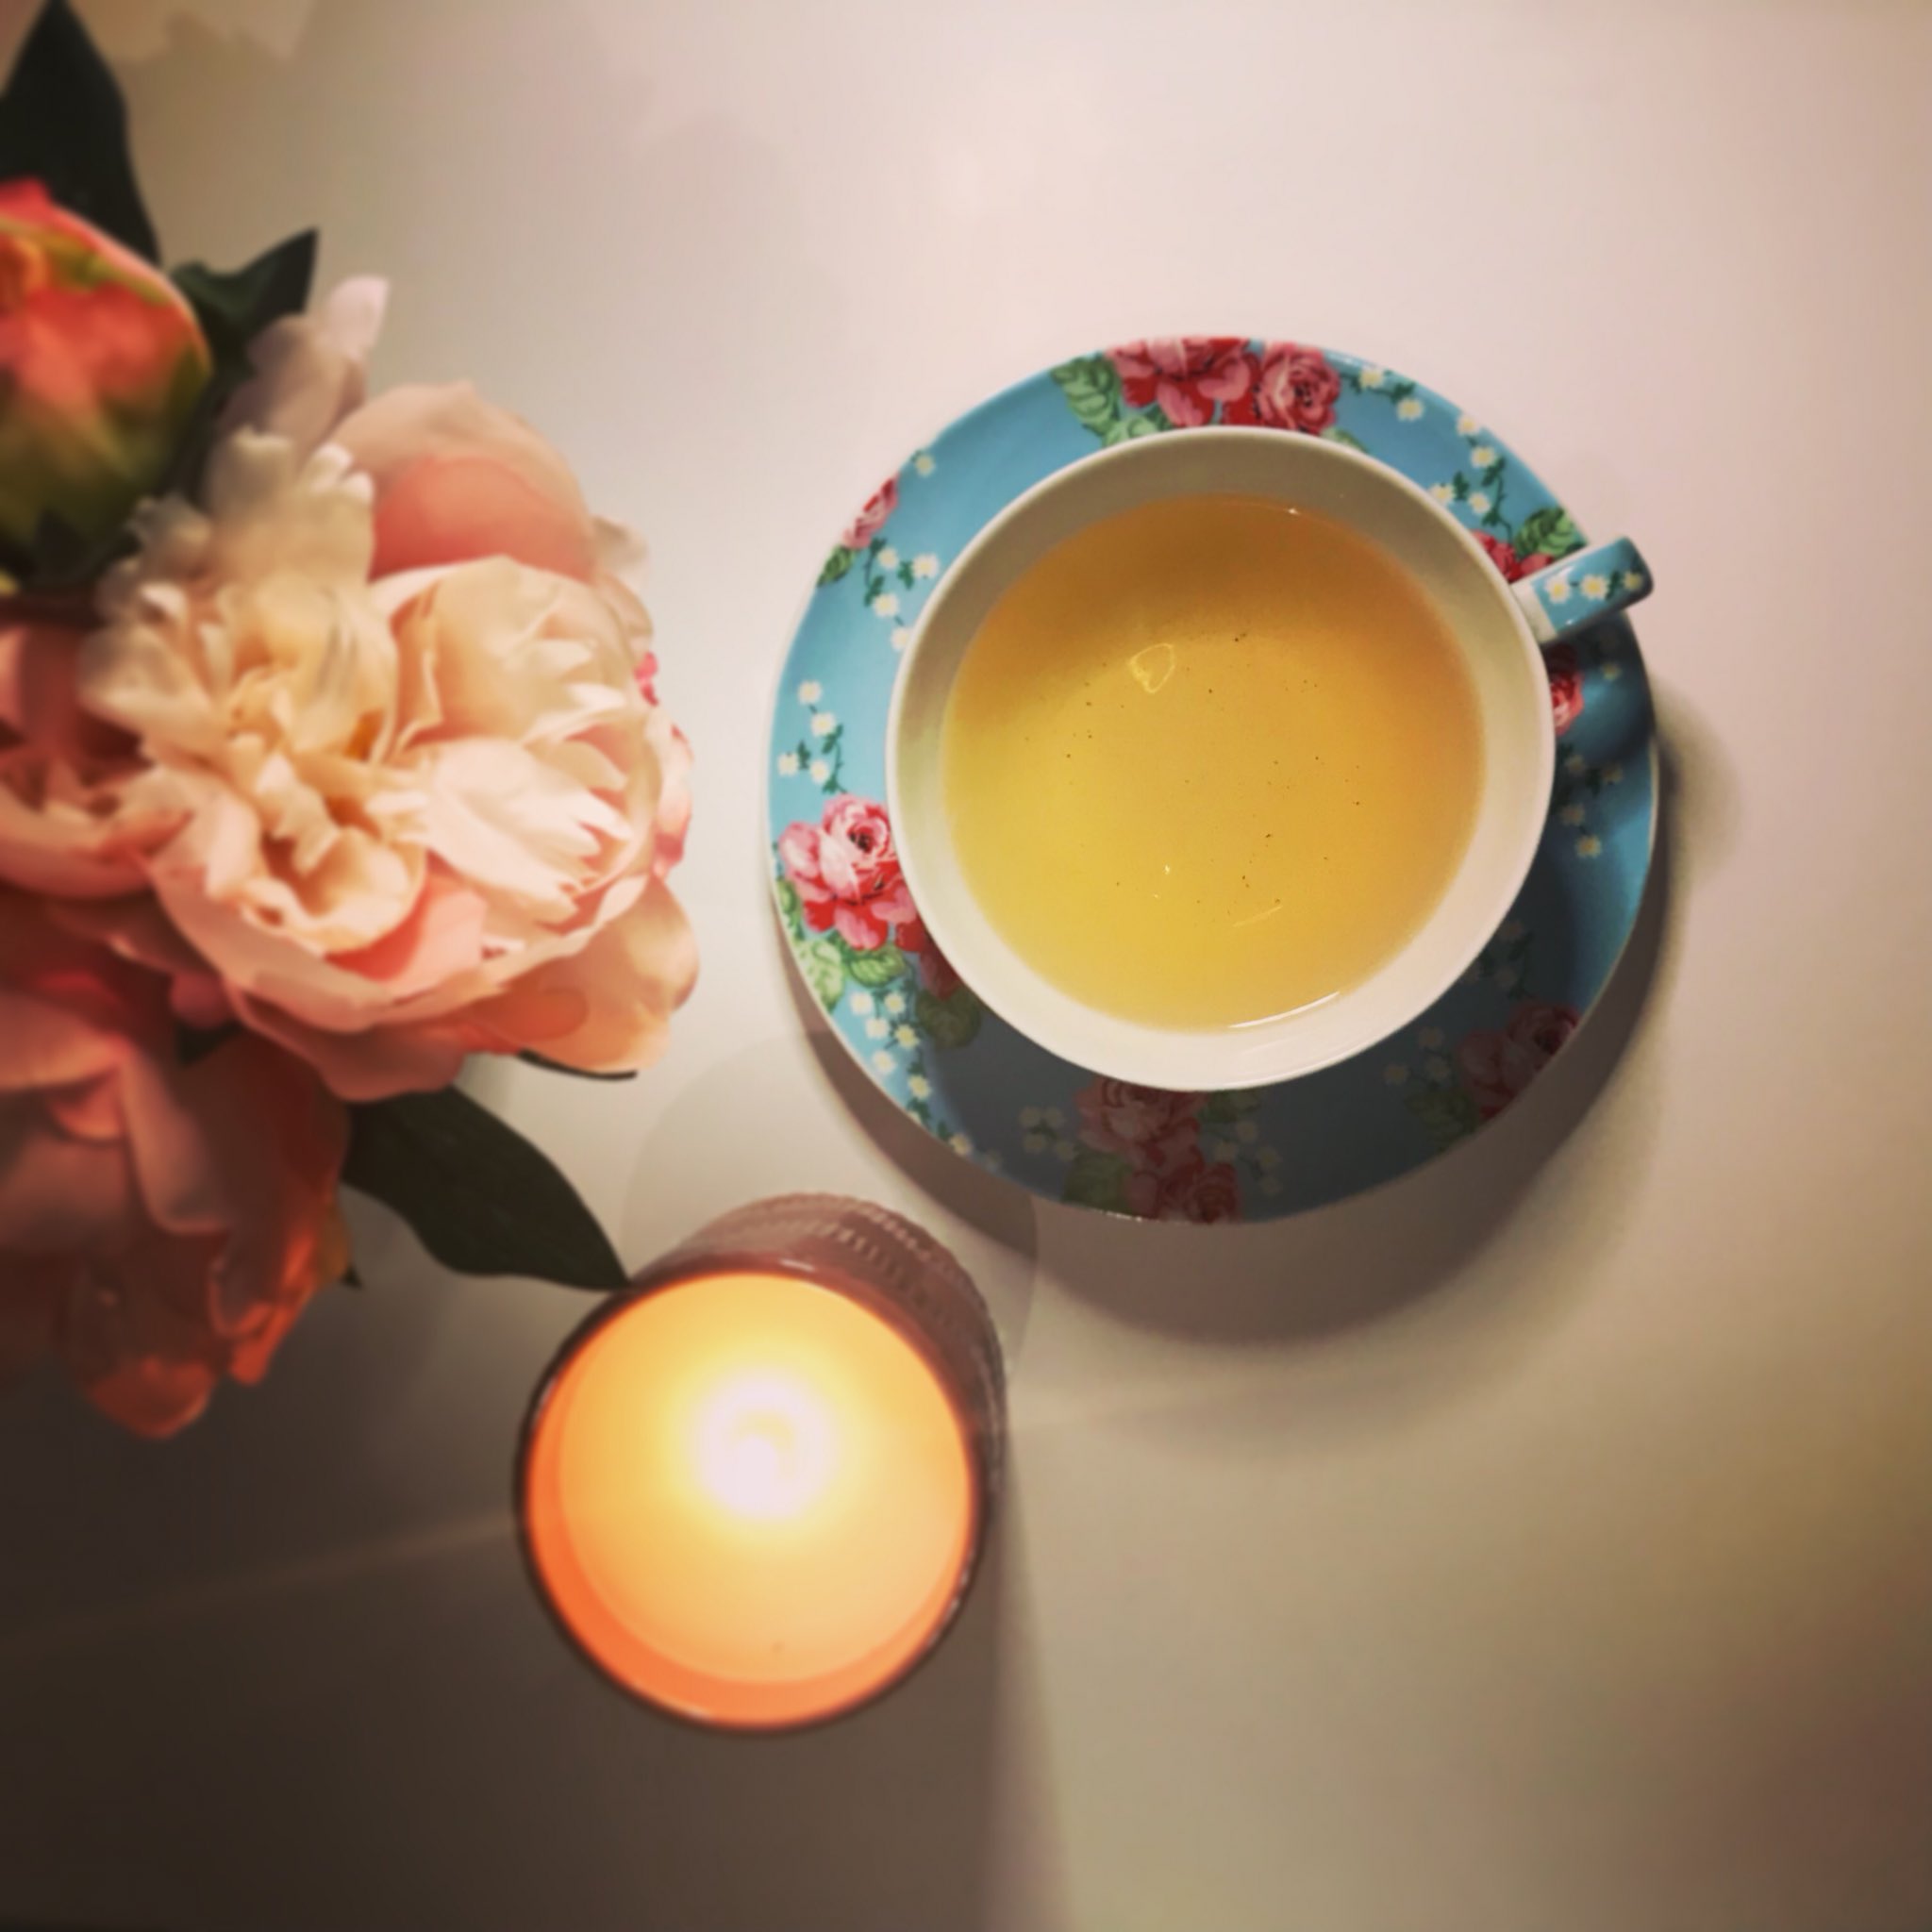 Rebecca on X: Mariage Frères Milky Blue. This is one of my favourites, it  smells very milky and the taste is creamy and sweet. #mariagefreres  #milkyblue #bluetea #flowers #roses #teacup #candle #teatime #